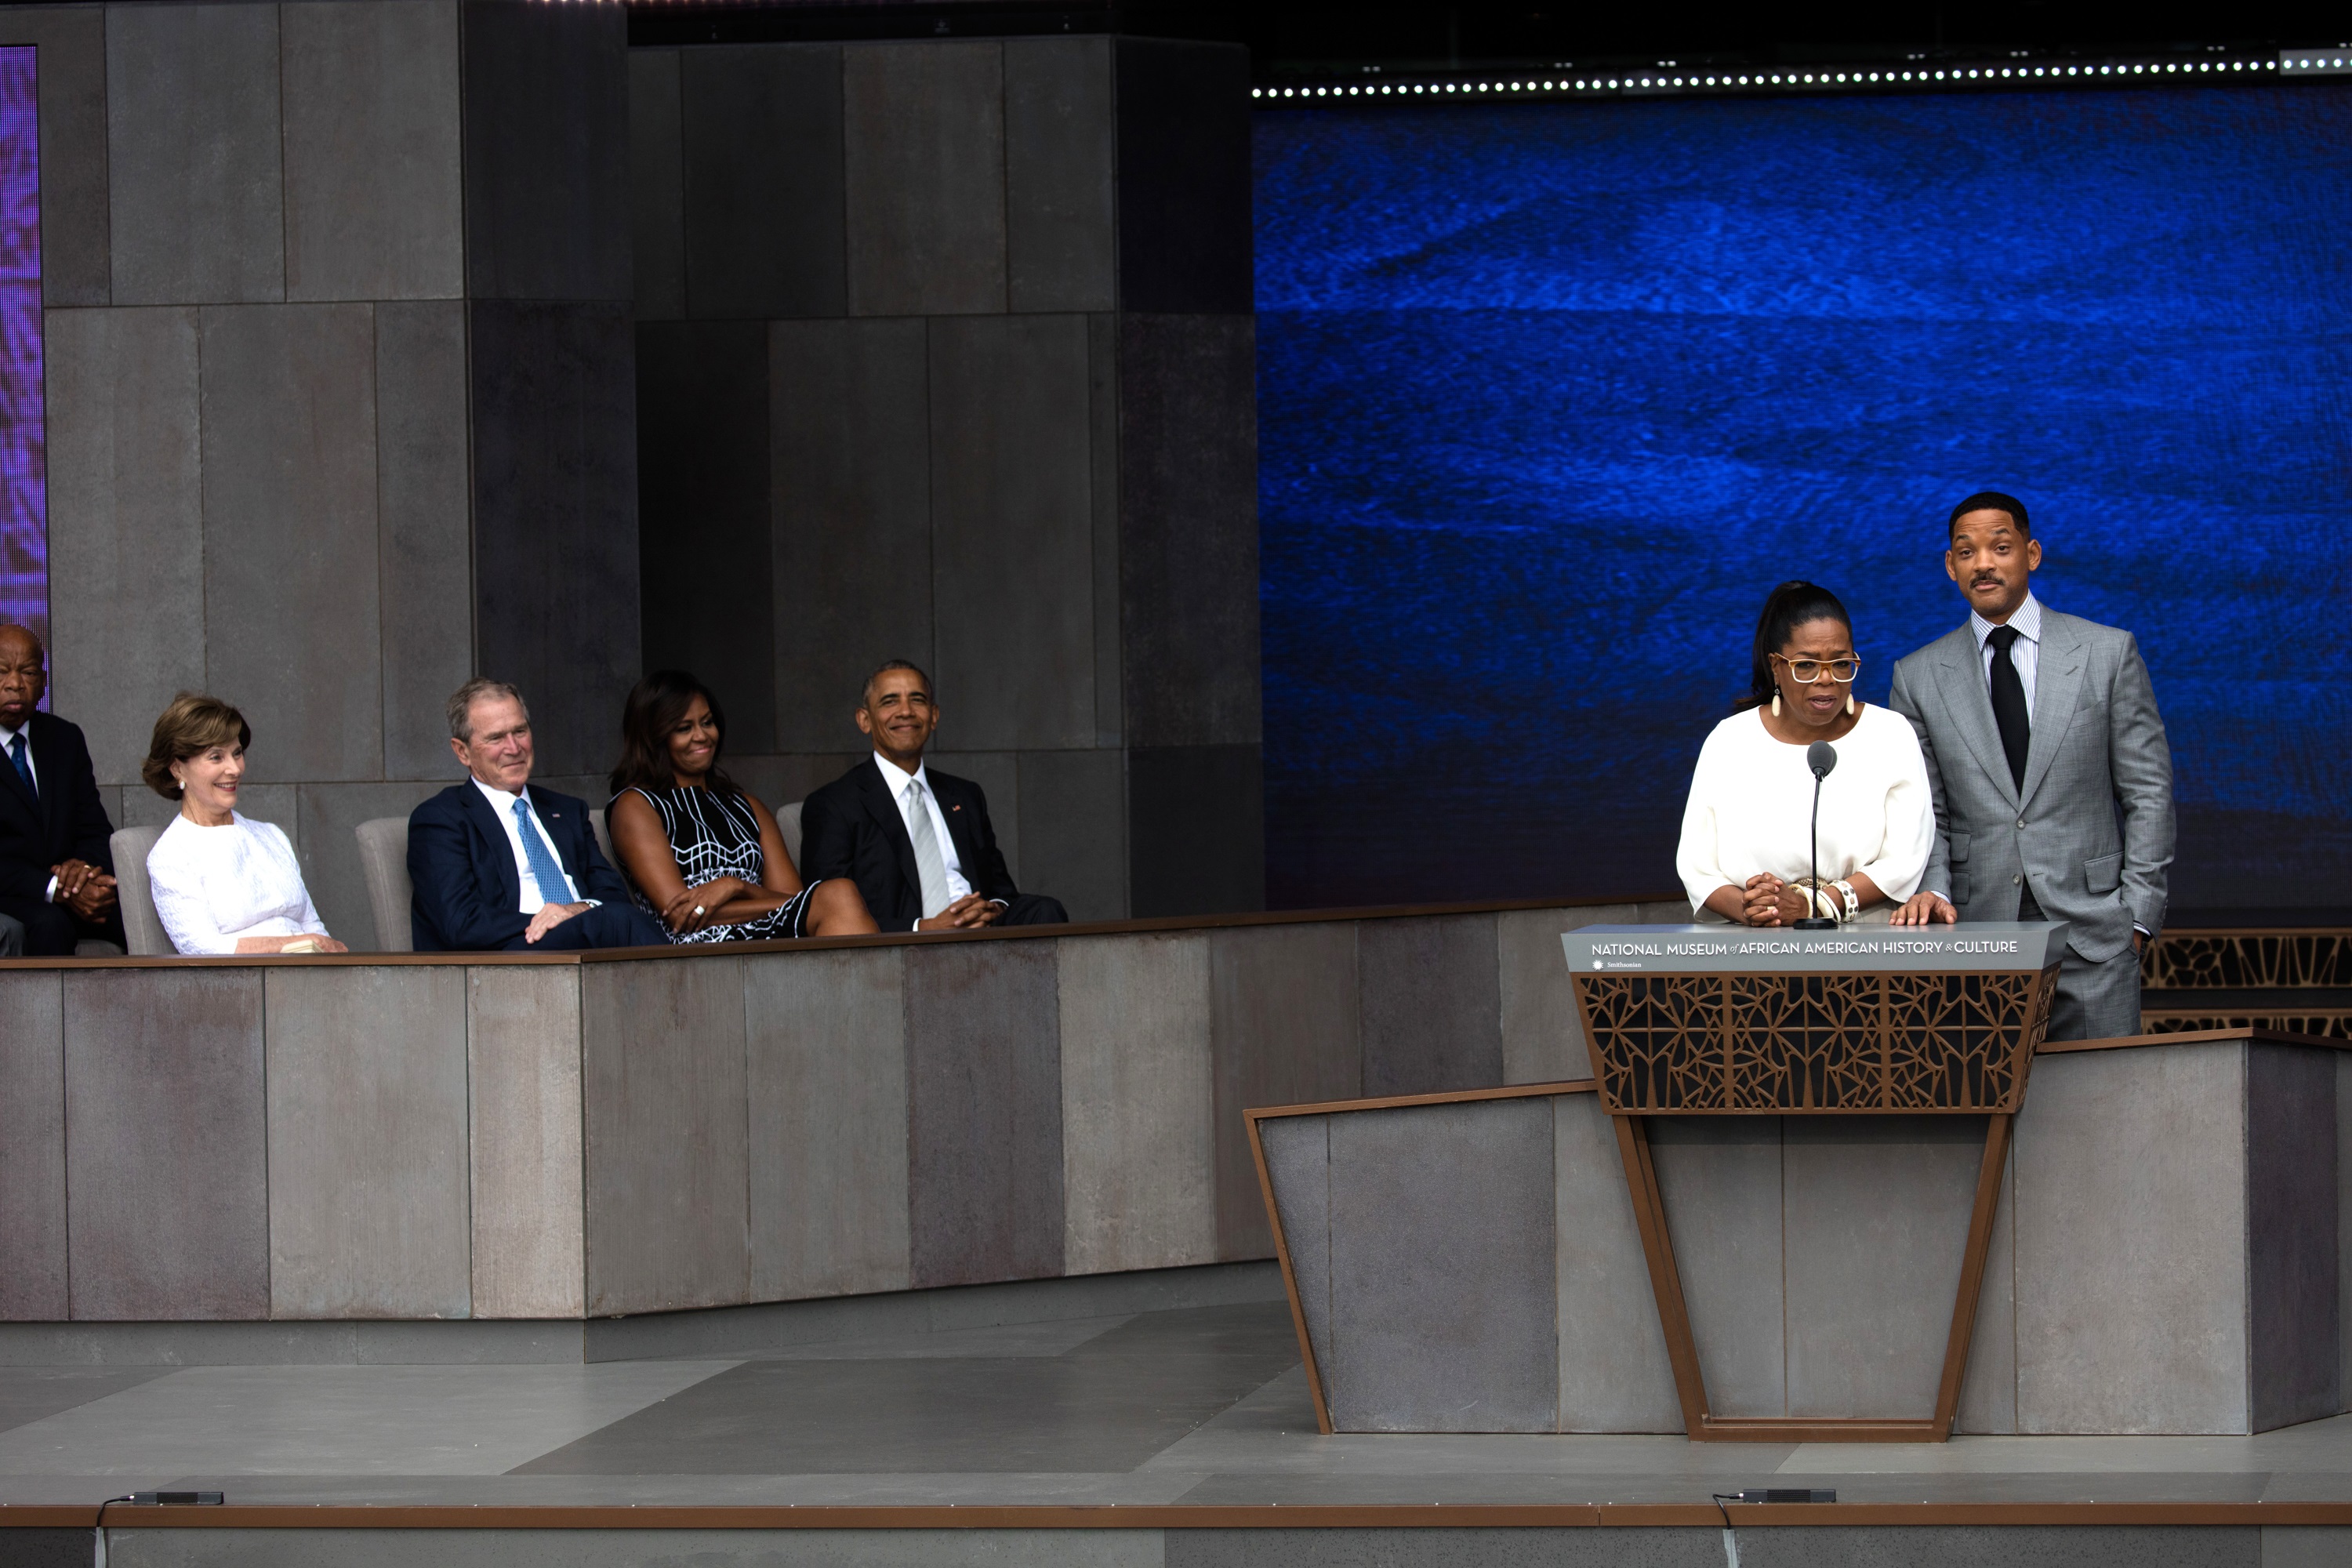 Oprah Winfrey and Will Smith present while John Lewis, former First Lady Laura Bush, former President George W Bush, First Lady Michelle Obama, and President Barack Obama listen to their presentation